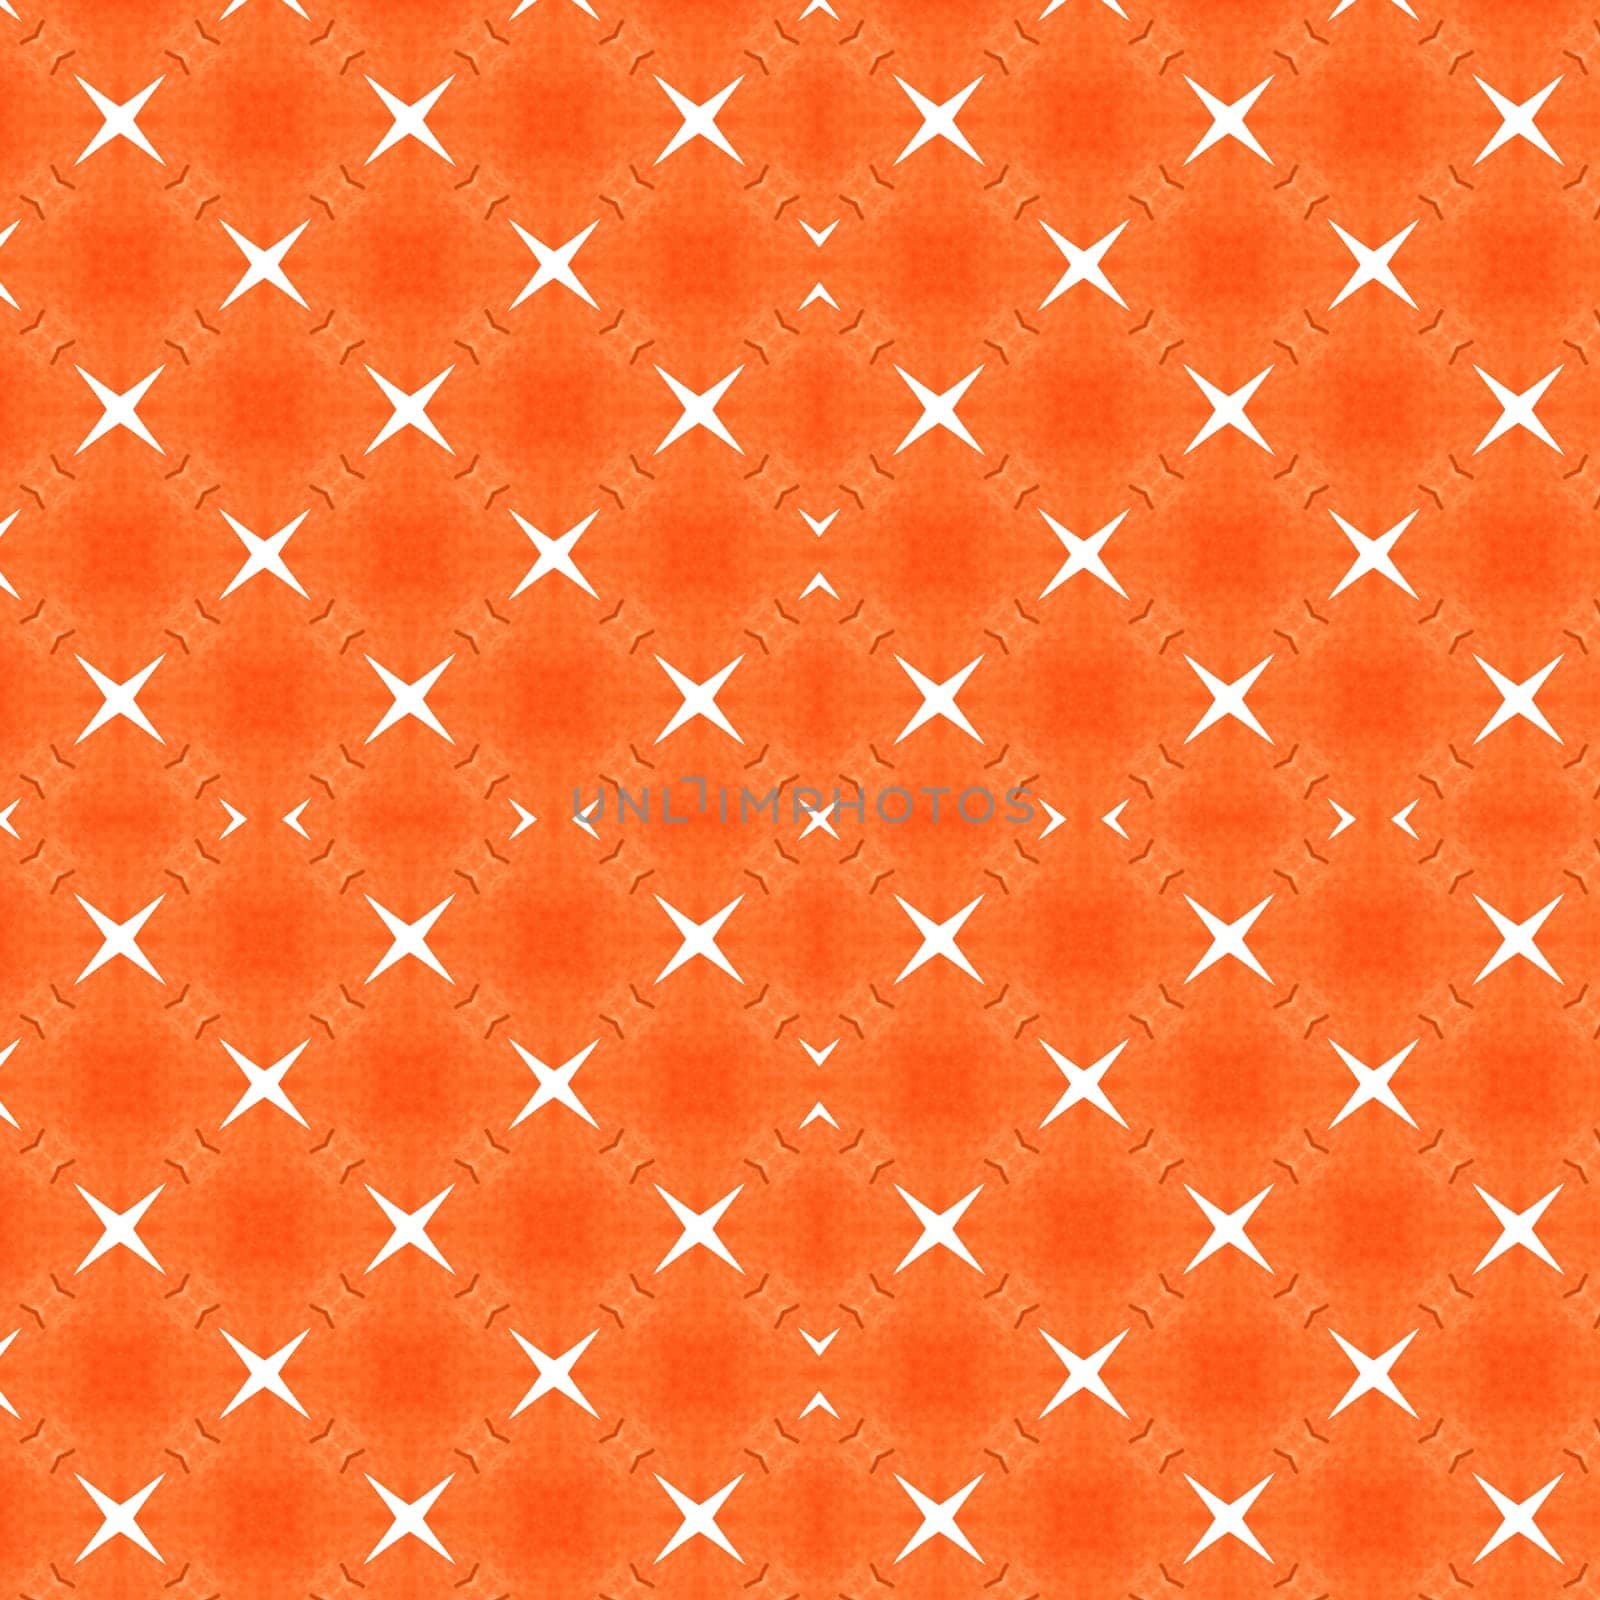 Abstract geometric shape pattern with an orange colour for background by iamnoonmai